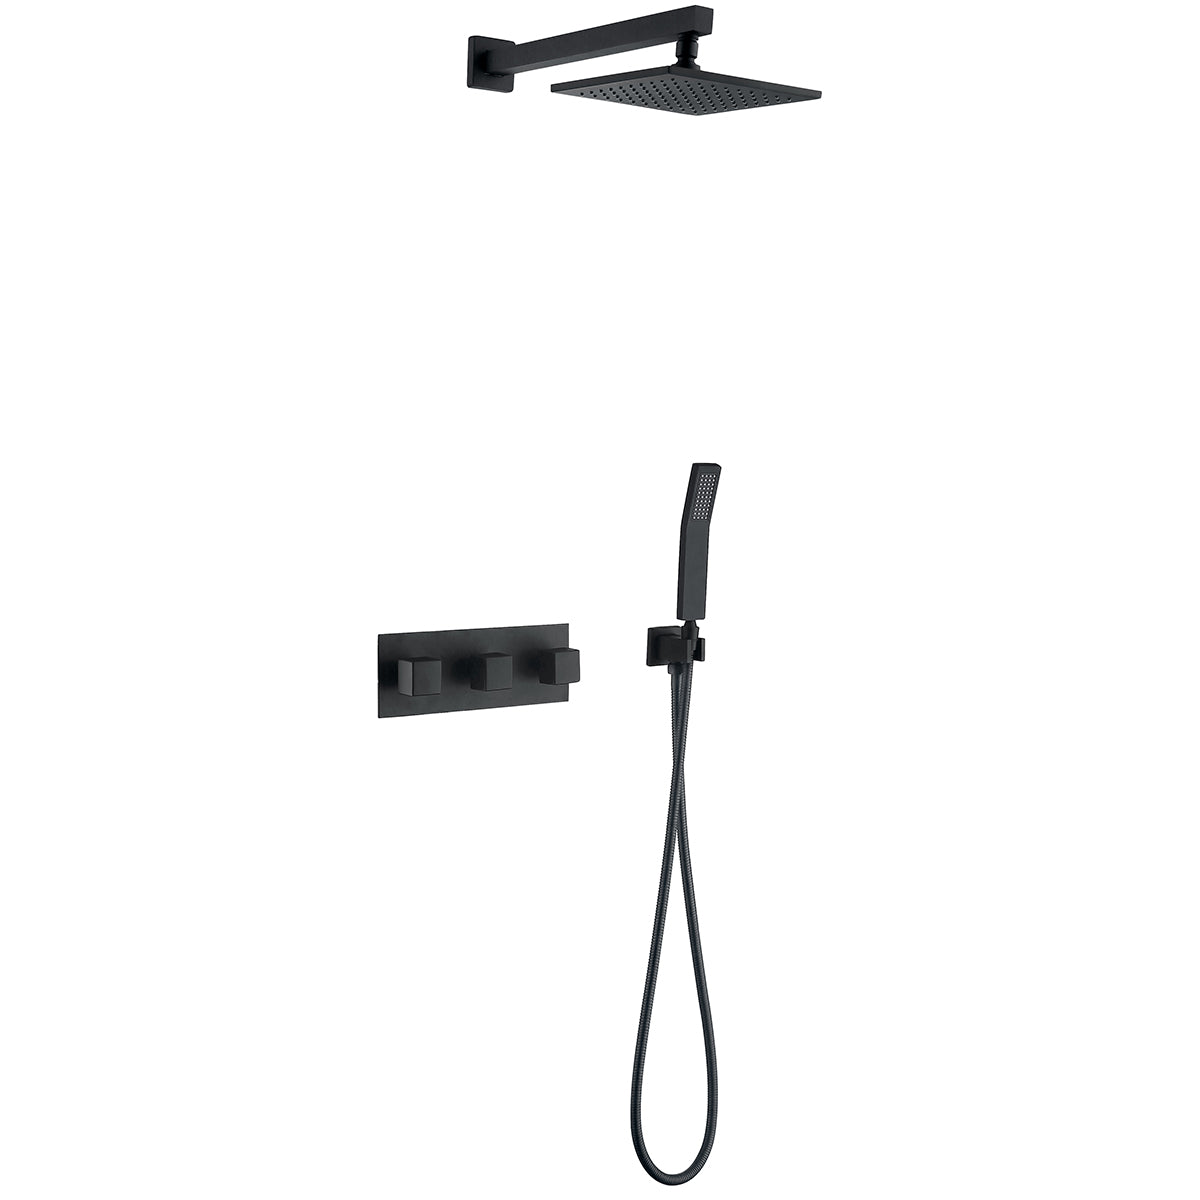 Boyel Living 2 GPM 10 in. Wall Mount Dual Shower Heads, High Pressure Shower System in Matte Black